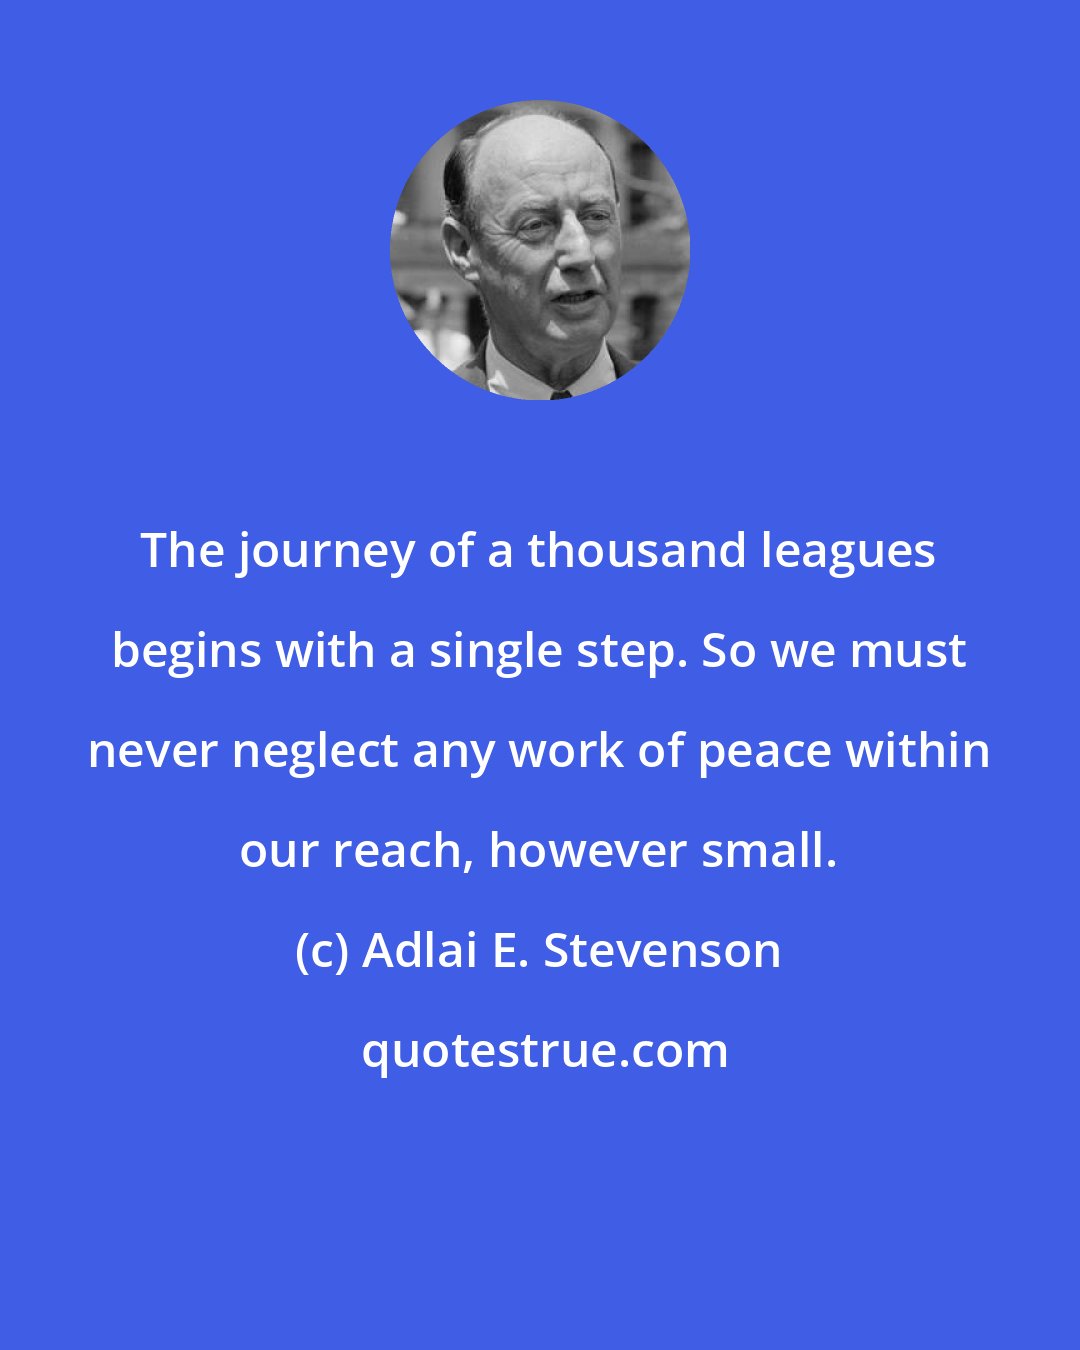 Adlai E. Stevenson: The journey of a thousand leagues begins with a single step. So we must never neglect any work of peace within our reach, however small.